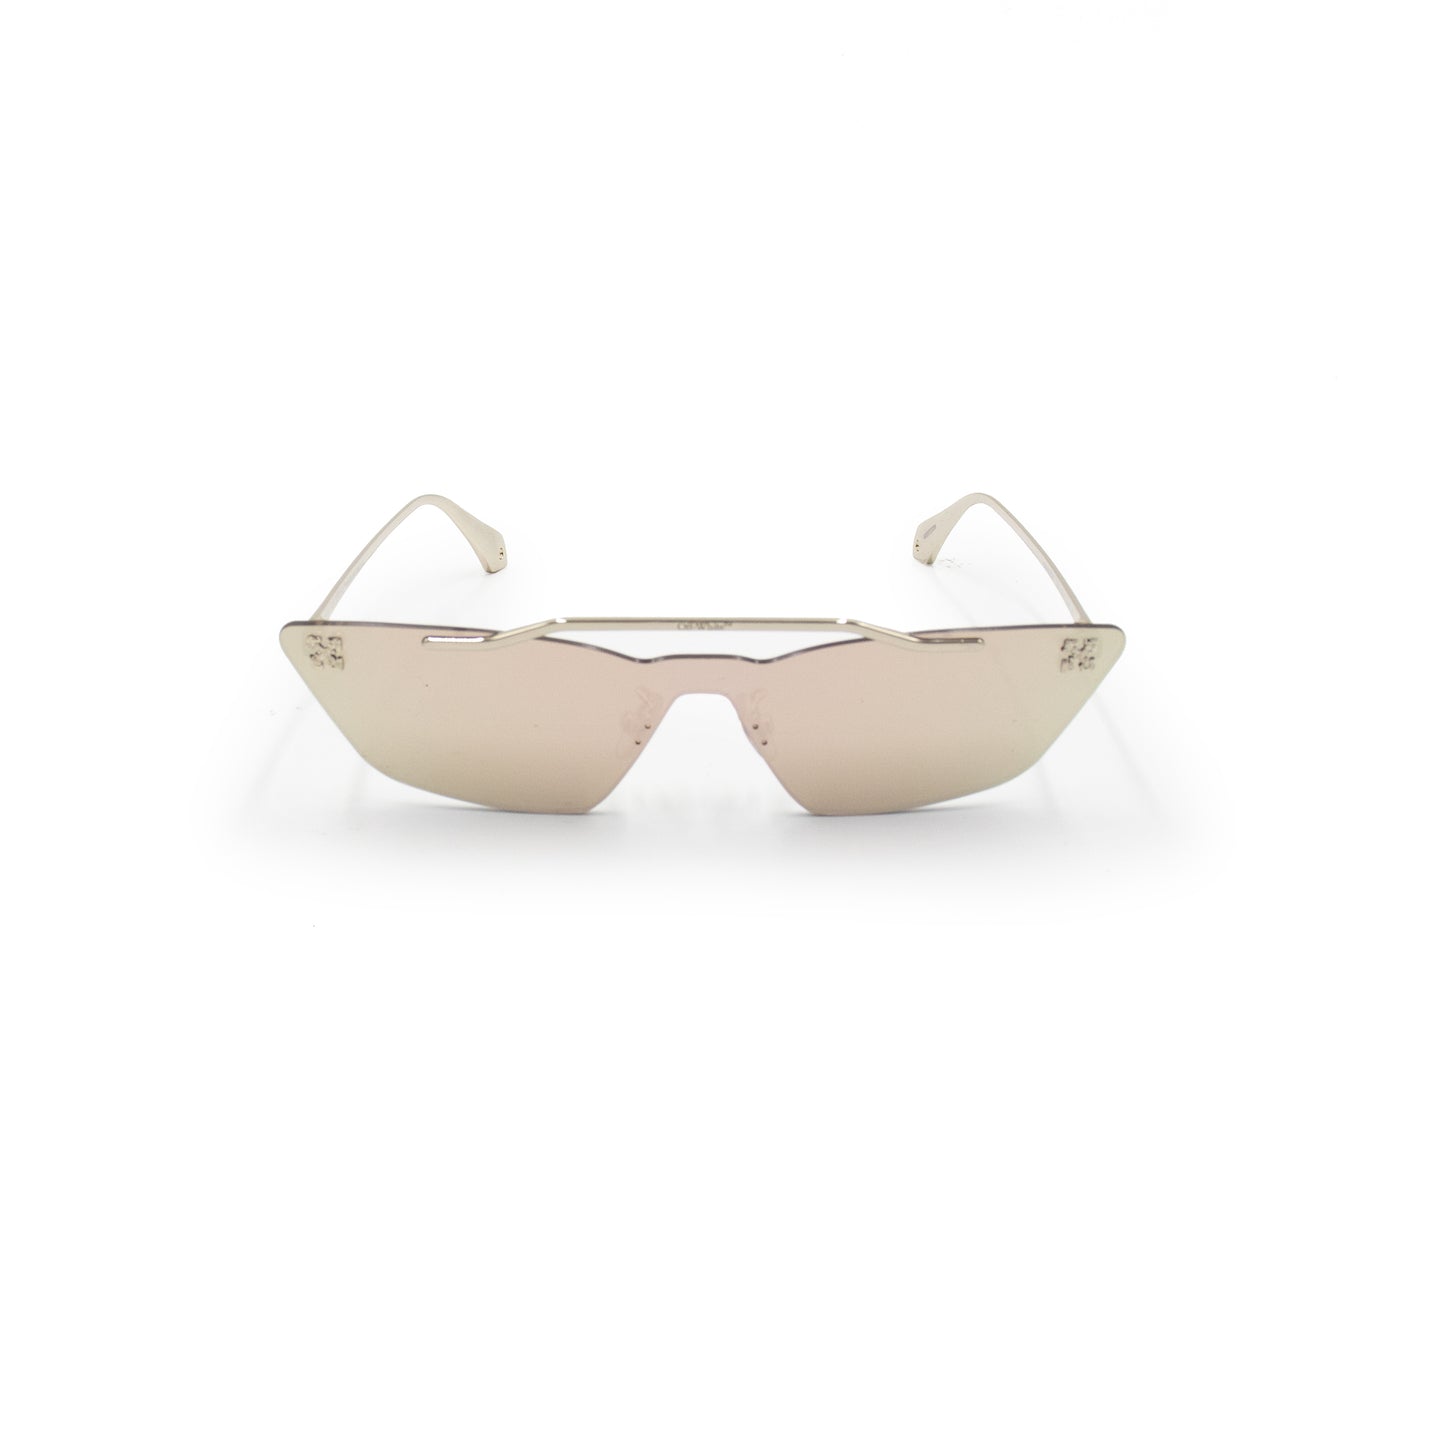 Metal Mask Sunglasses in Gold